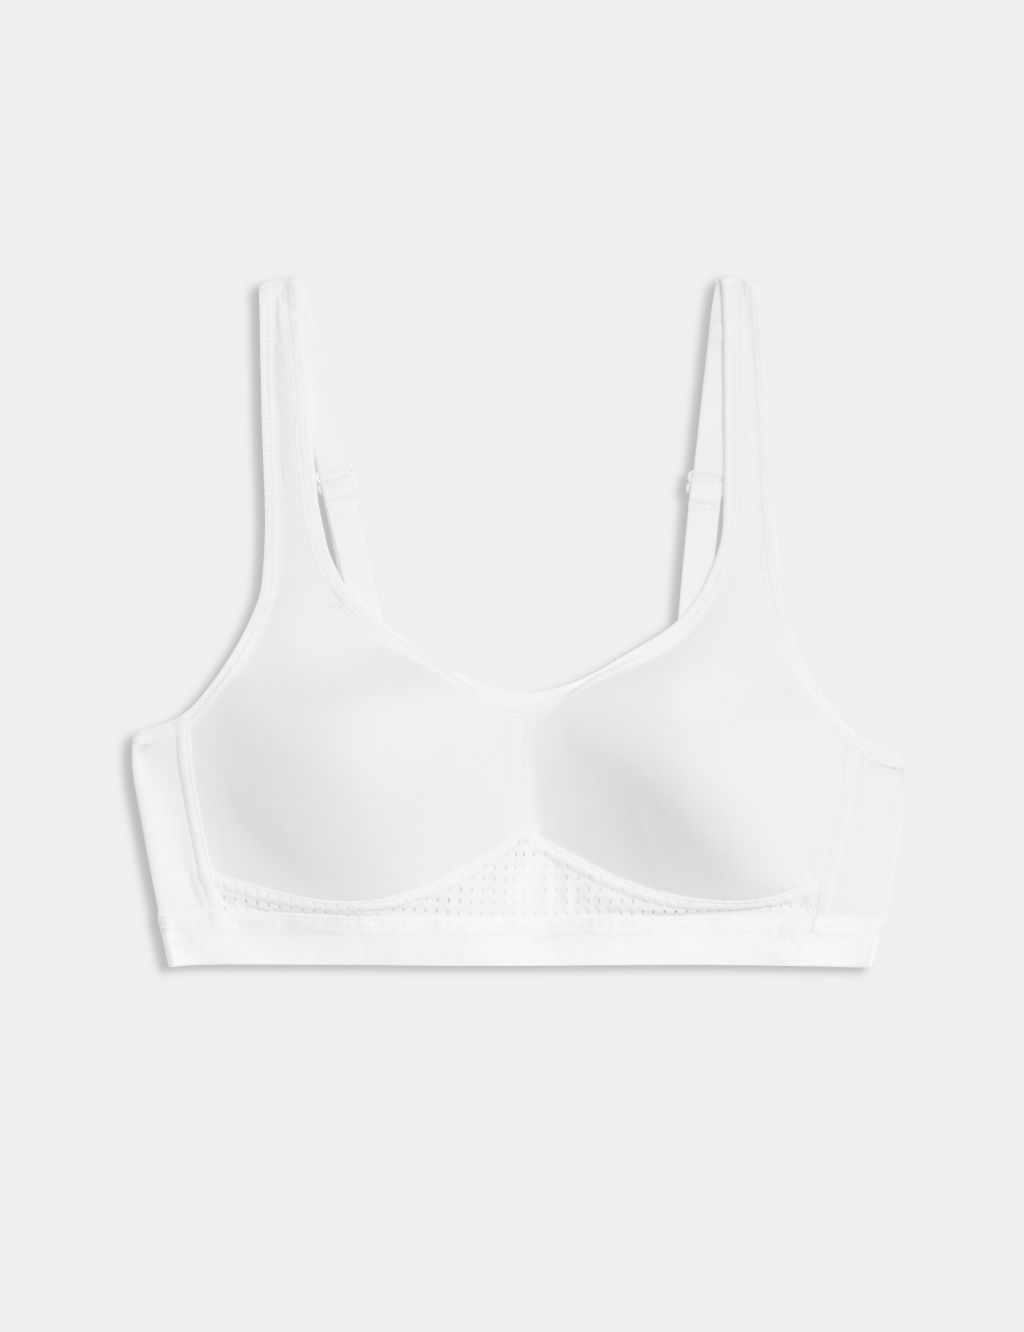 Marks & Spencer M&S Mixed Bra Lot White Almond Wireless 36D 38D 2pc